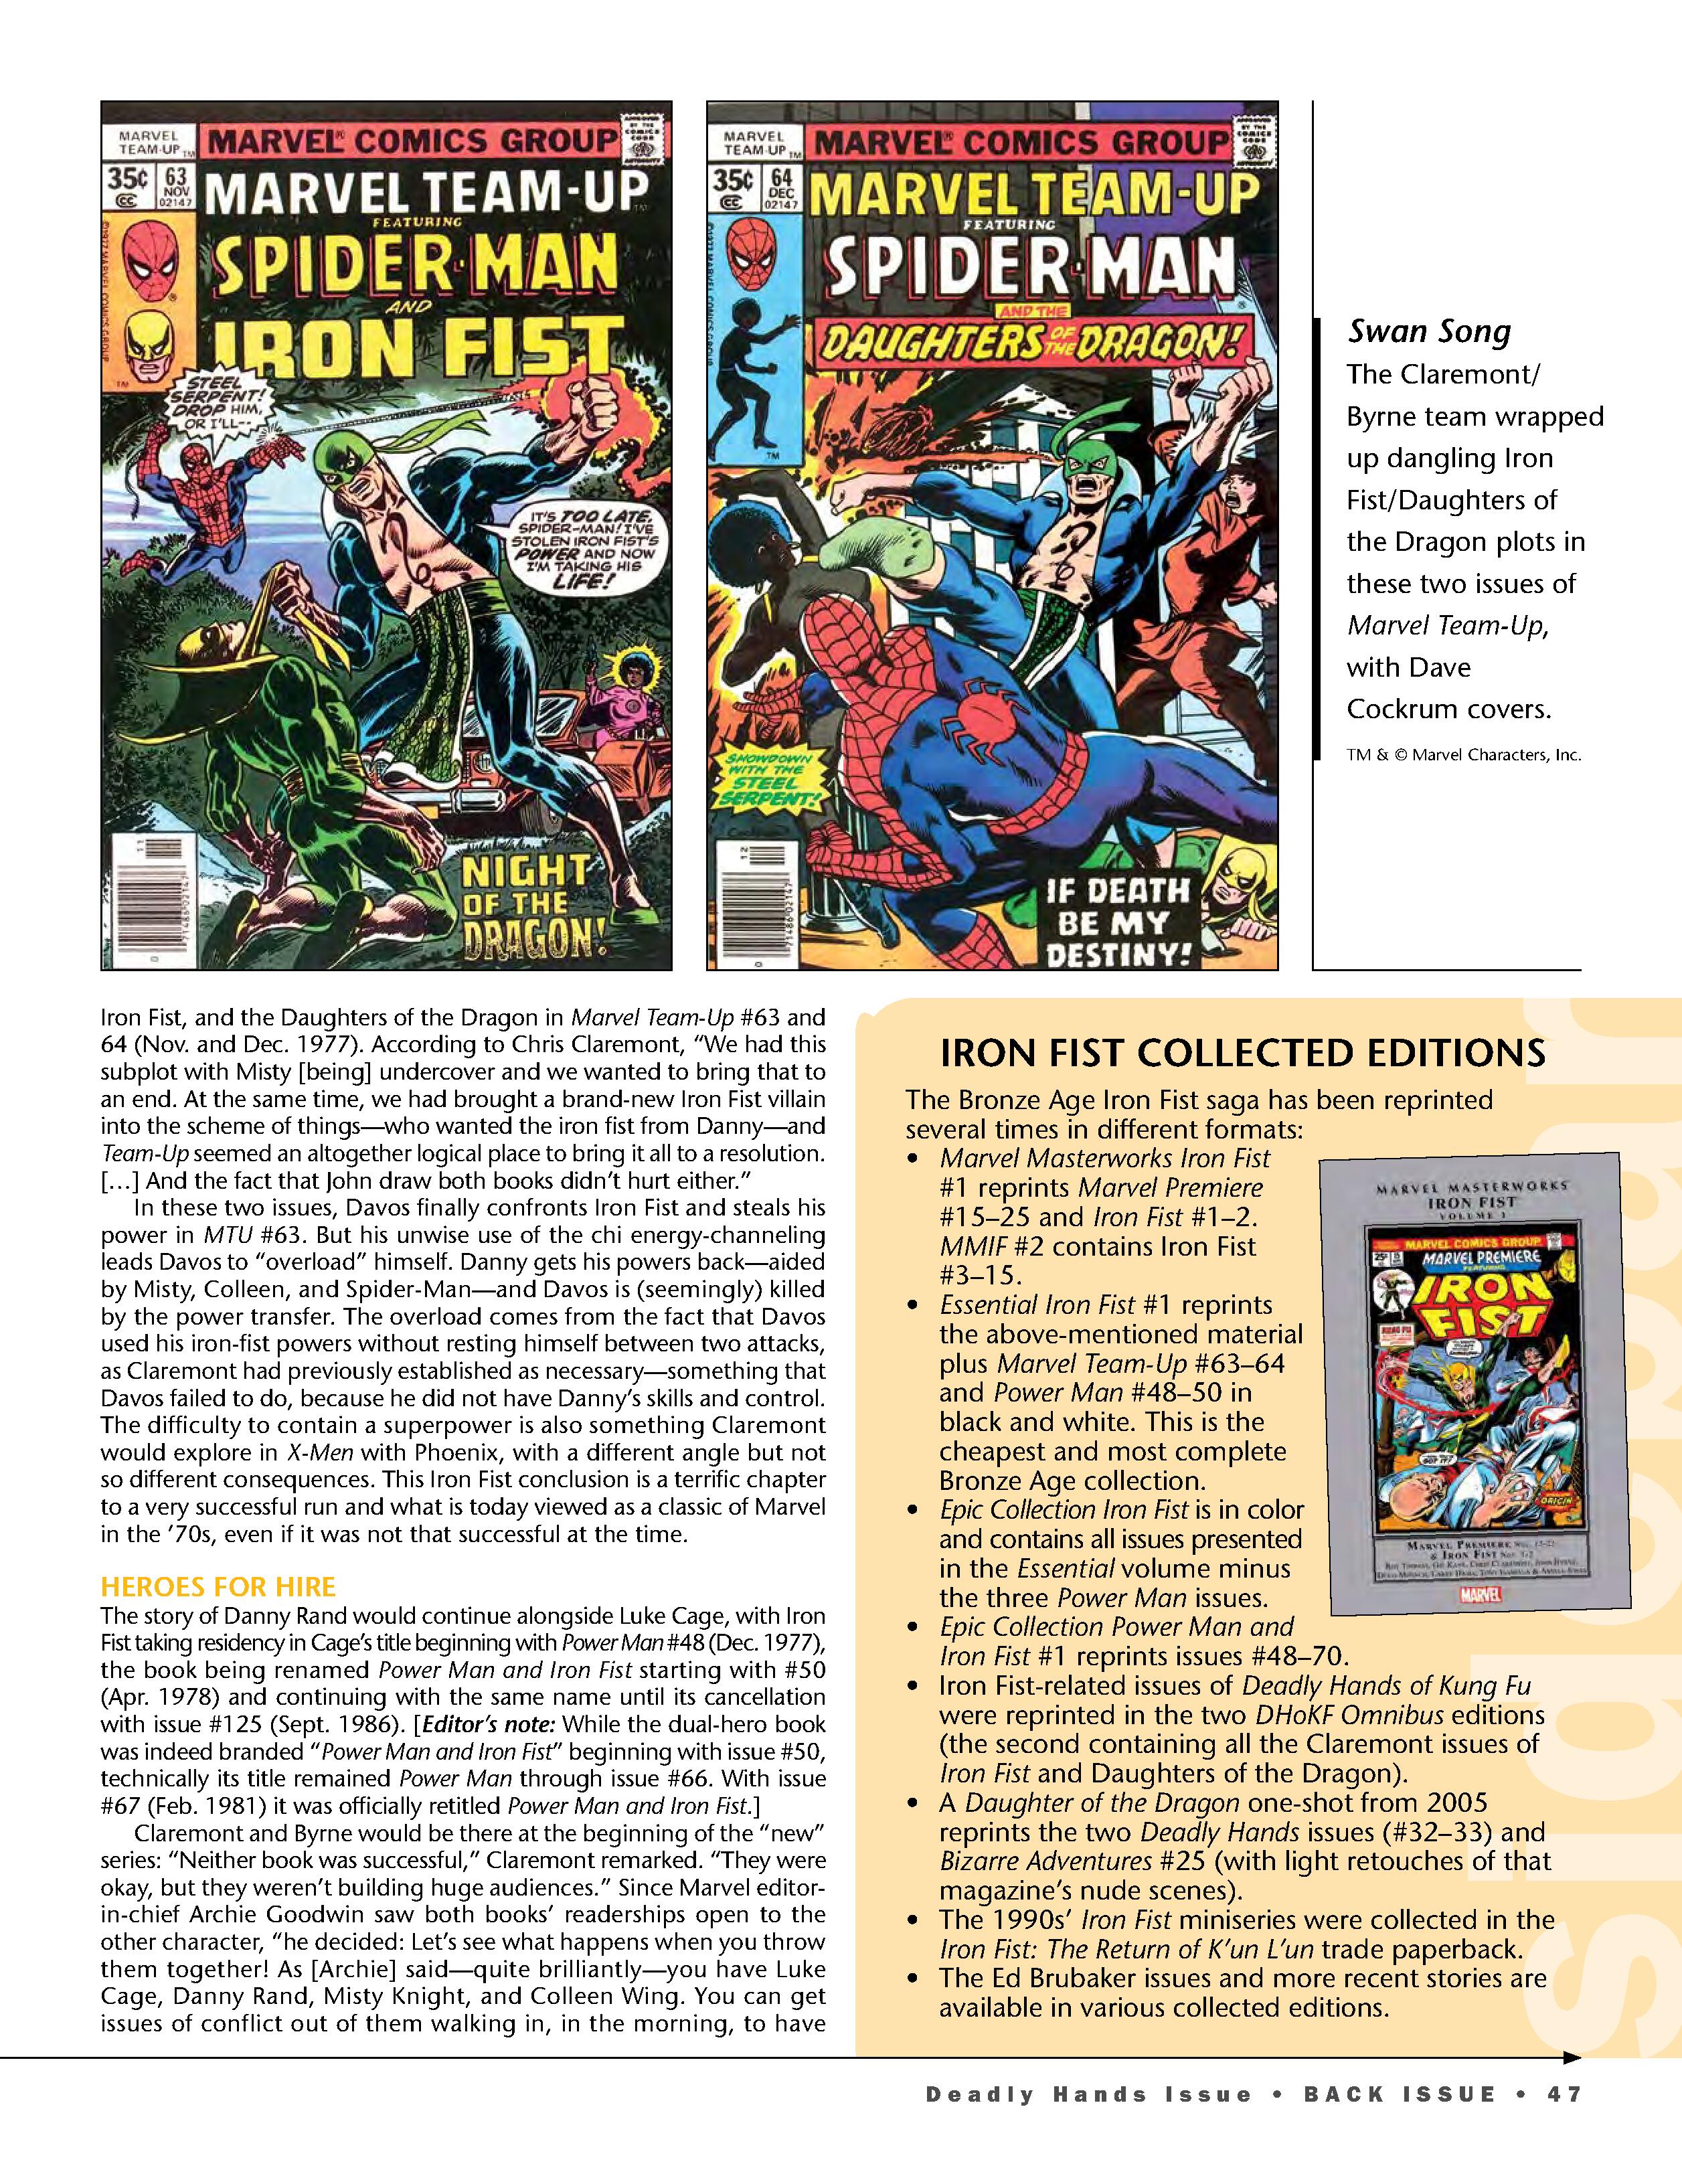 Read online Back Issue comic -  Issue #105 - 49